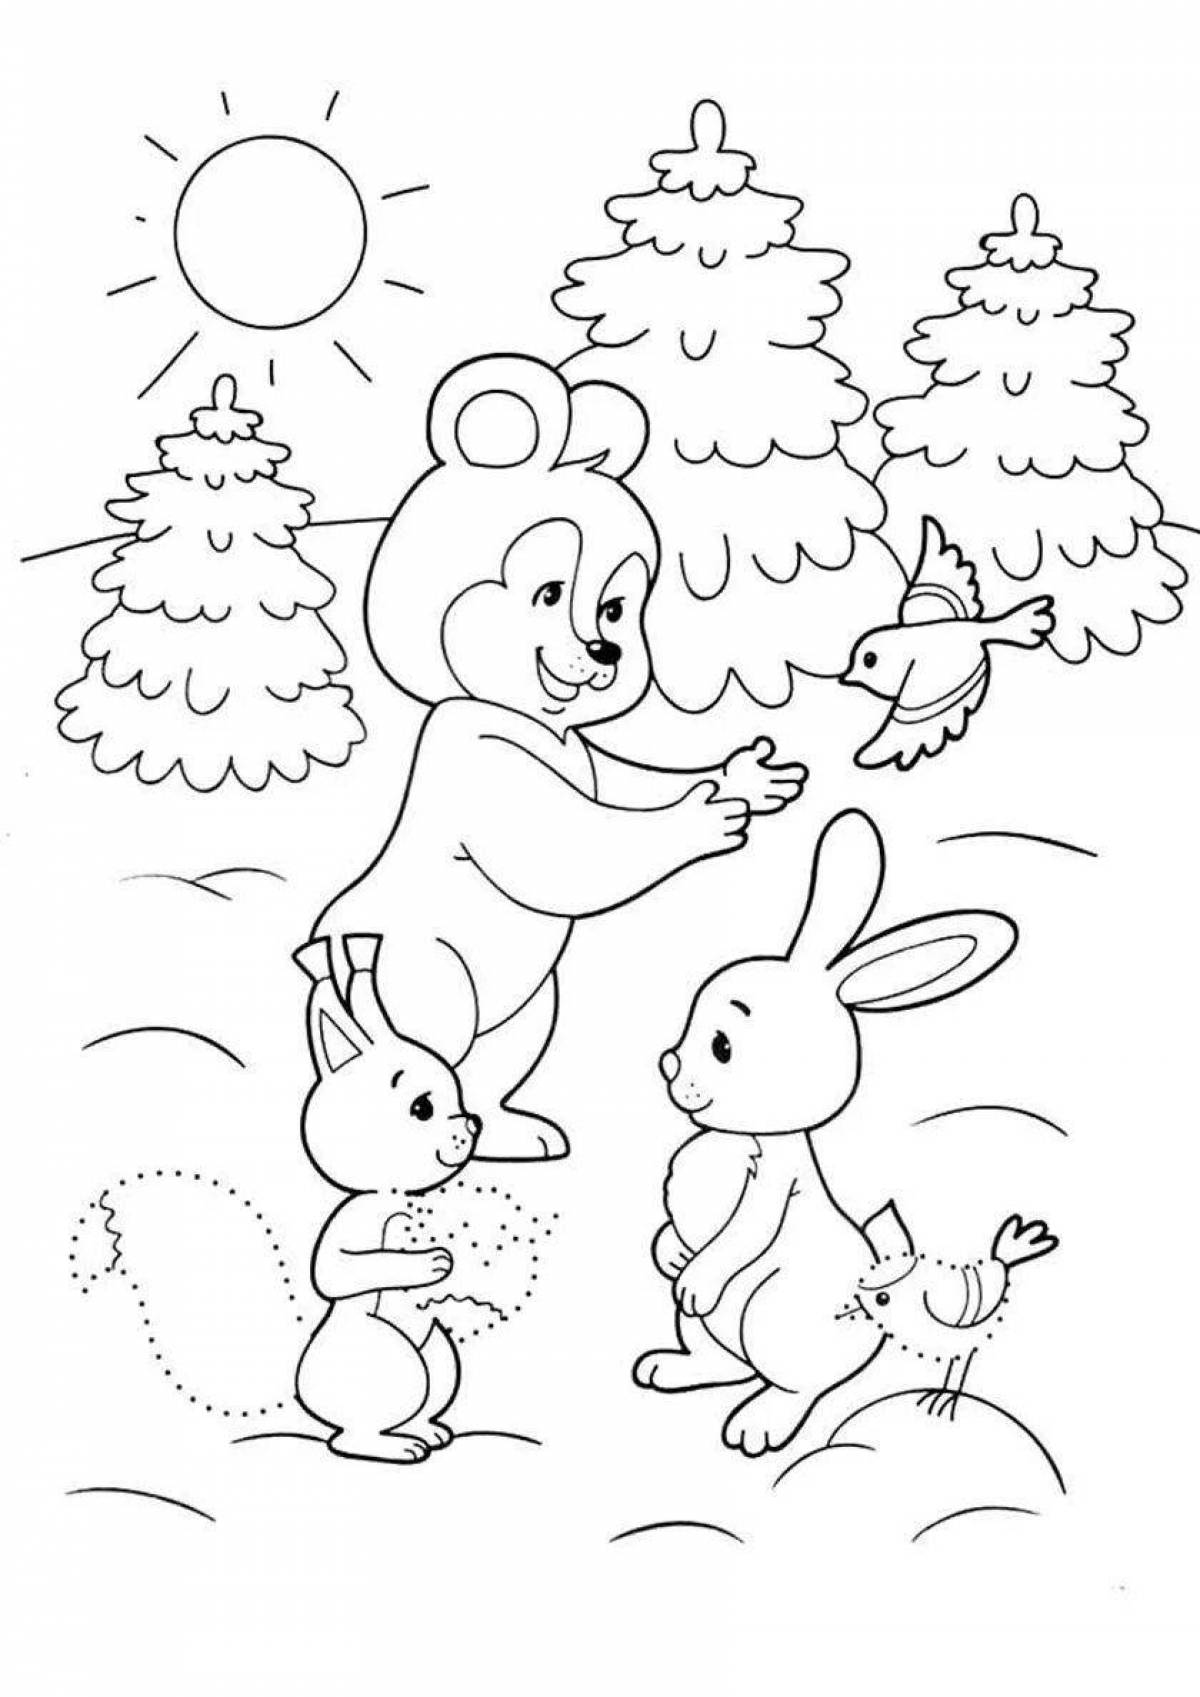 Fluffy rabbit coloring book in winter